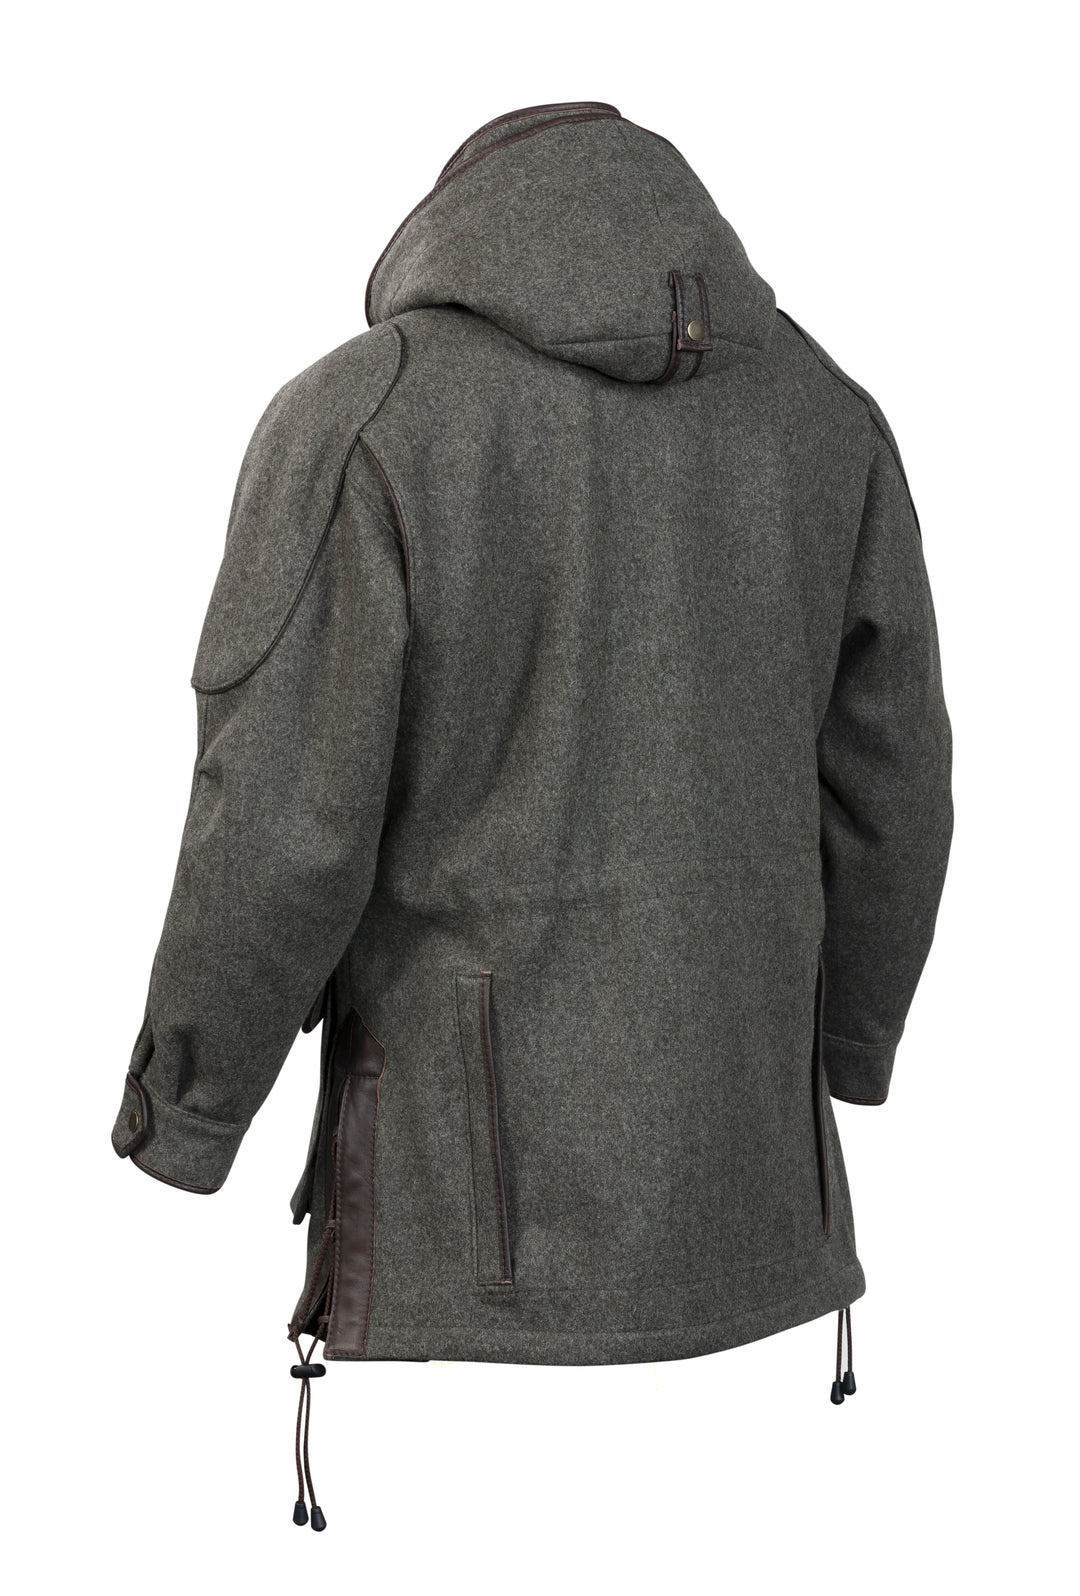 Winter Hiking Jacket with Wool Lining - China Wool Coat and Fleece